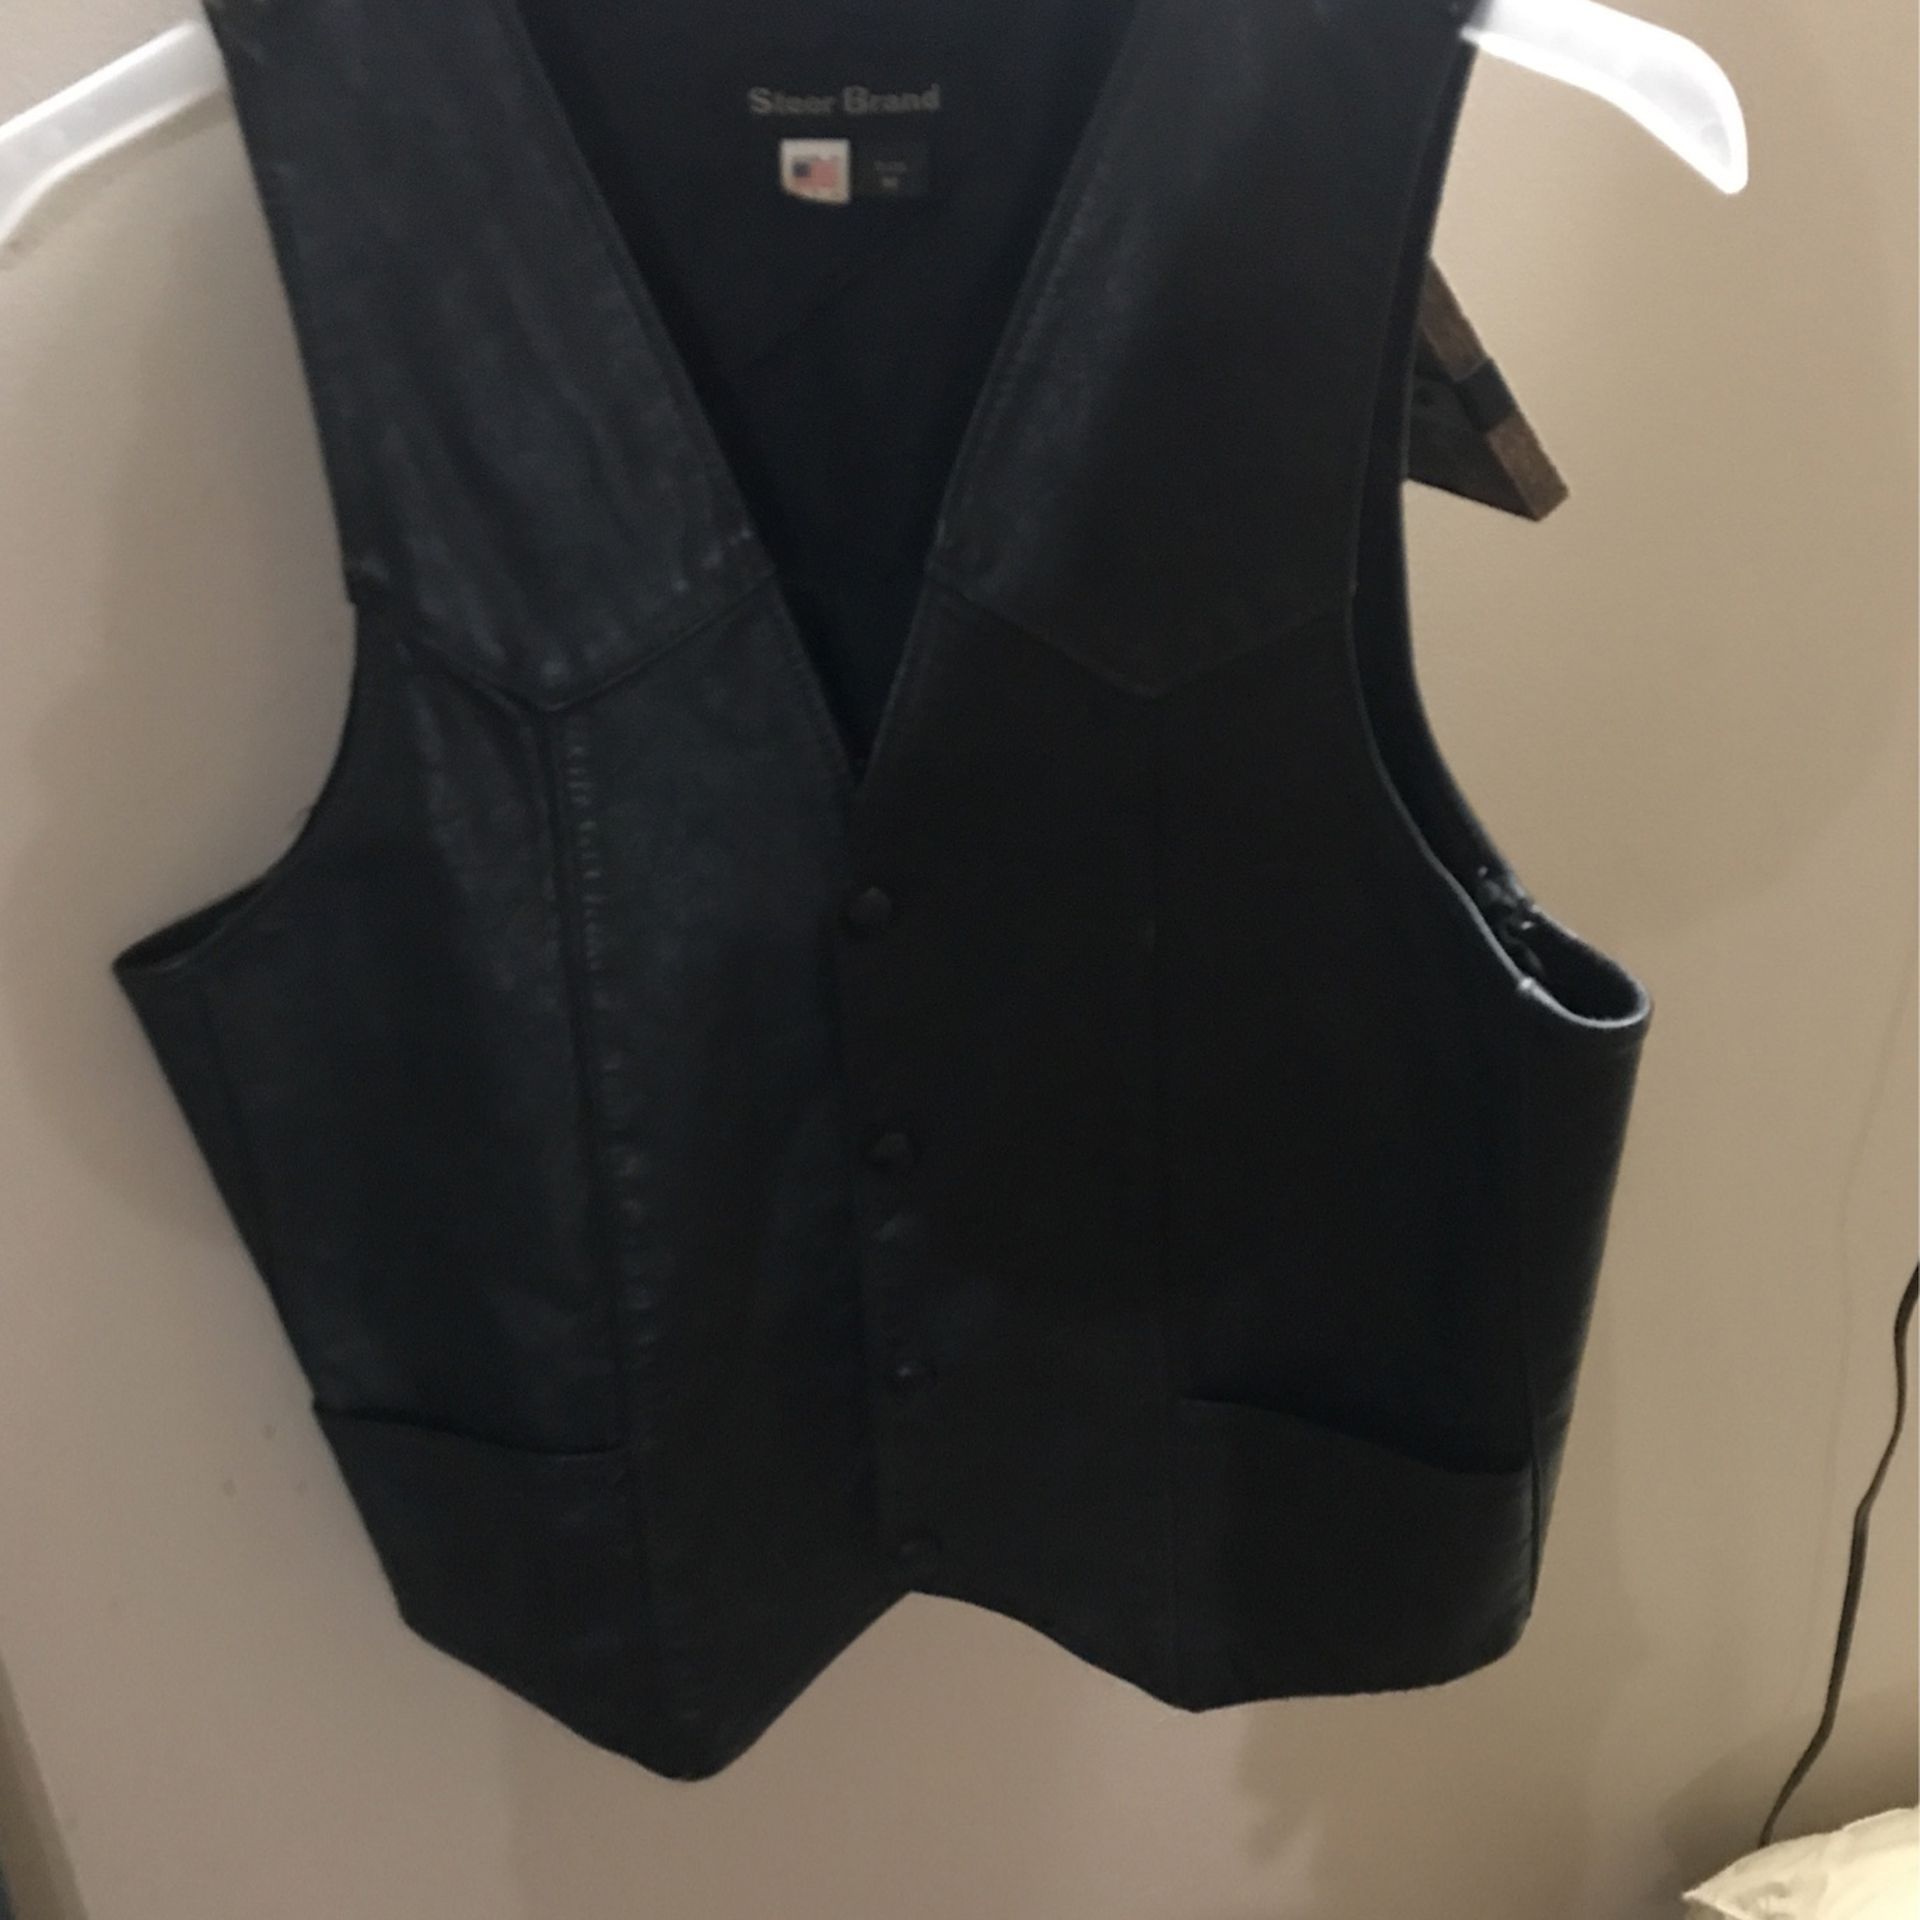 Leather vest size medium made in the USA